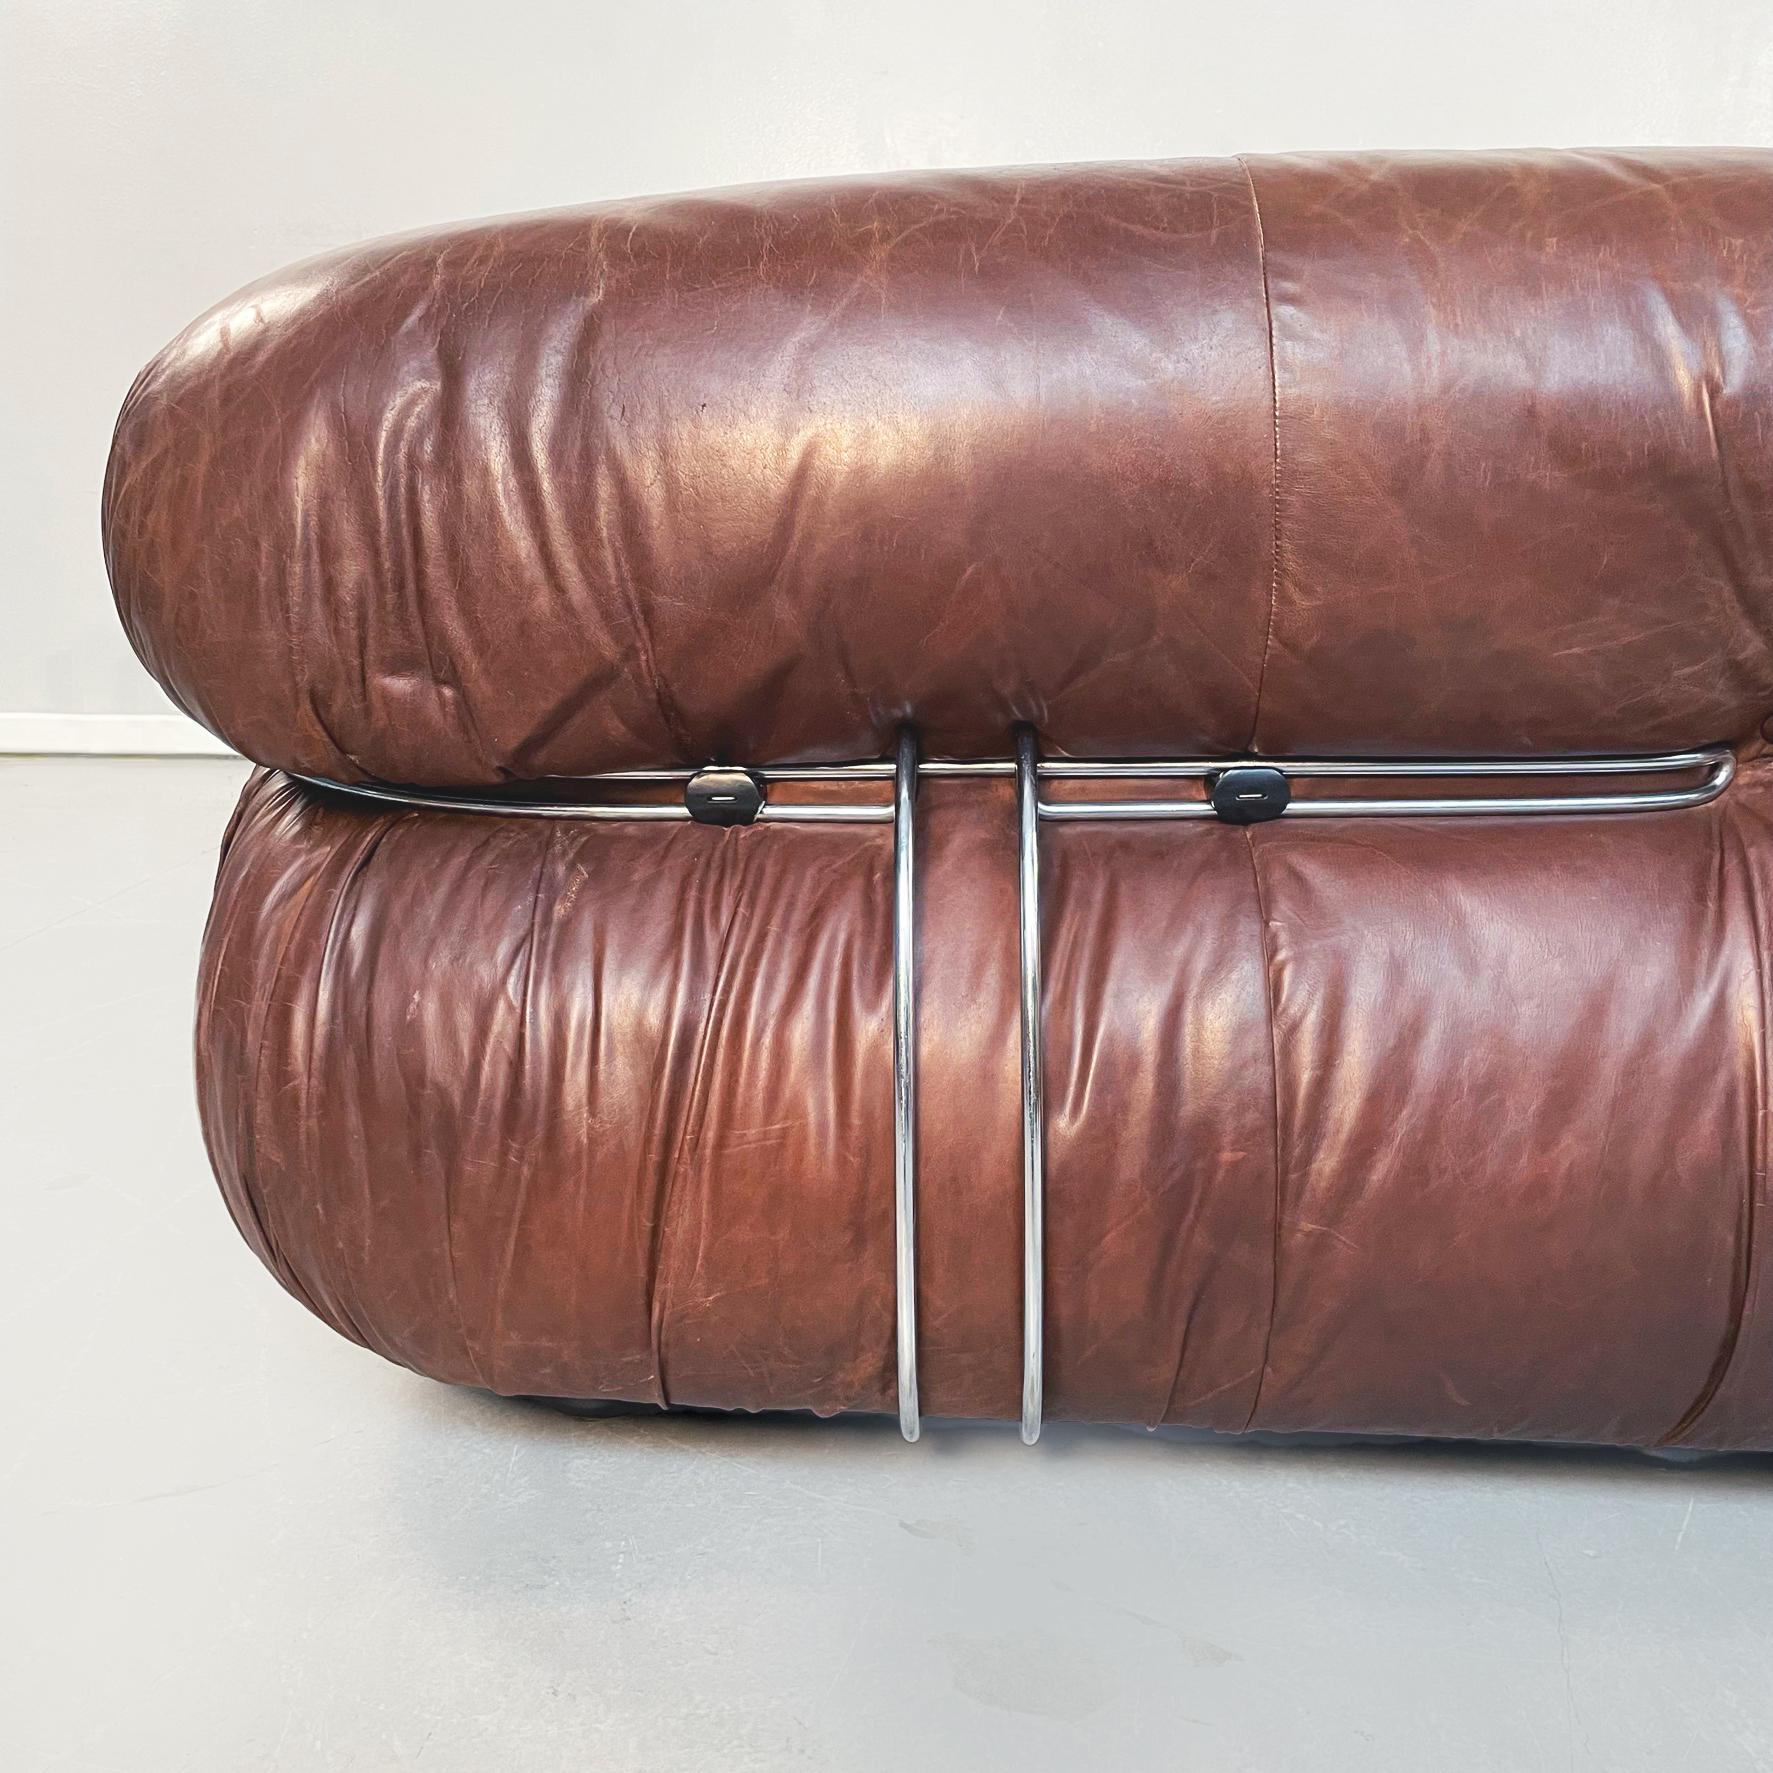 Italian MidCentury Brown Leather Soriana Sofa by Afra Tobia Scarpa Cassina, 1970 For Sale 9